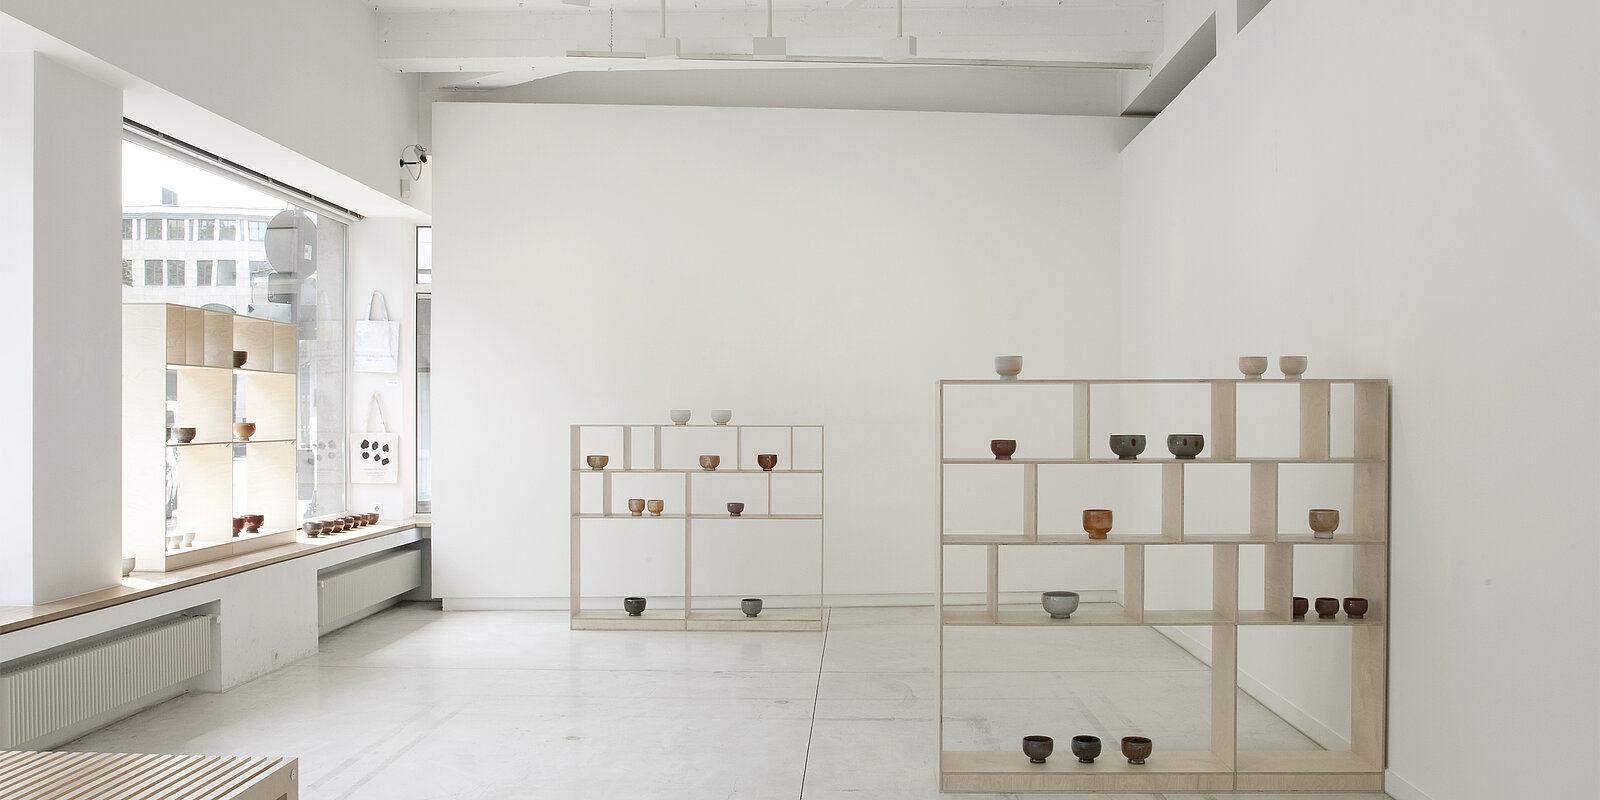 Installation view, Young-Jae Lee. Spinach Bowls, Galerie Karsten Greve Cologne, 2020. Photo: Lisa Busche